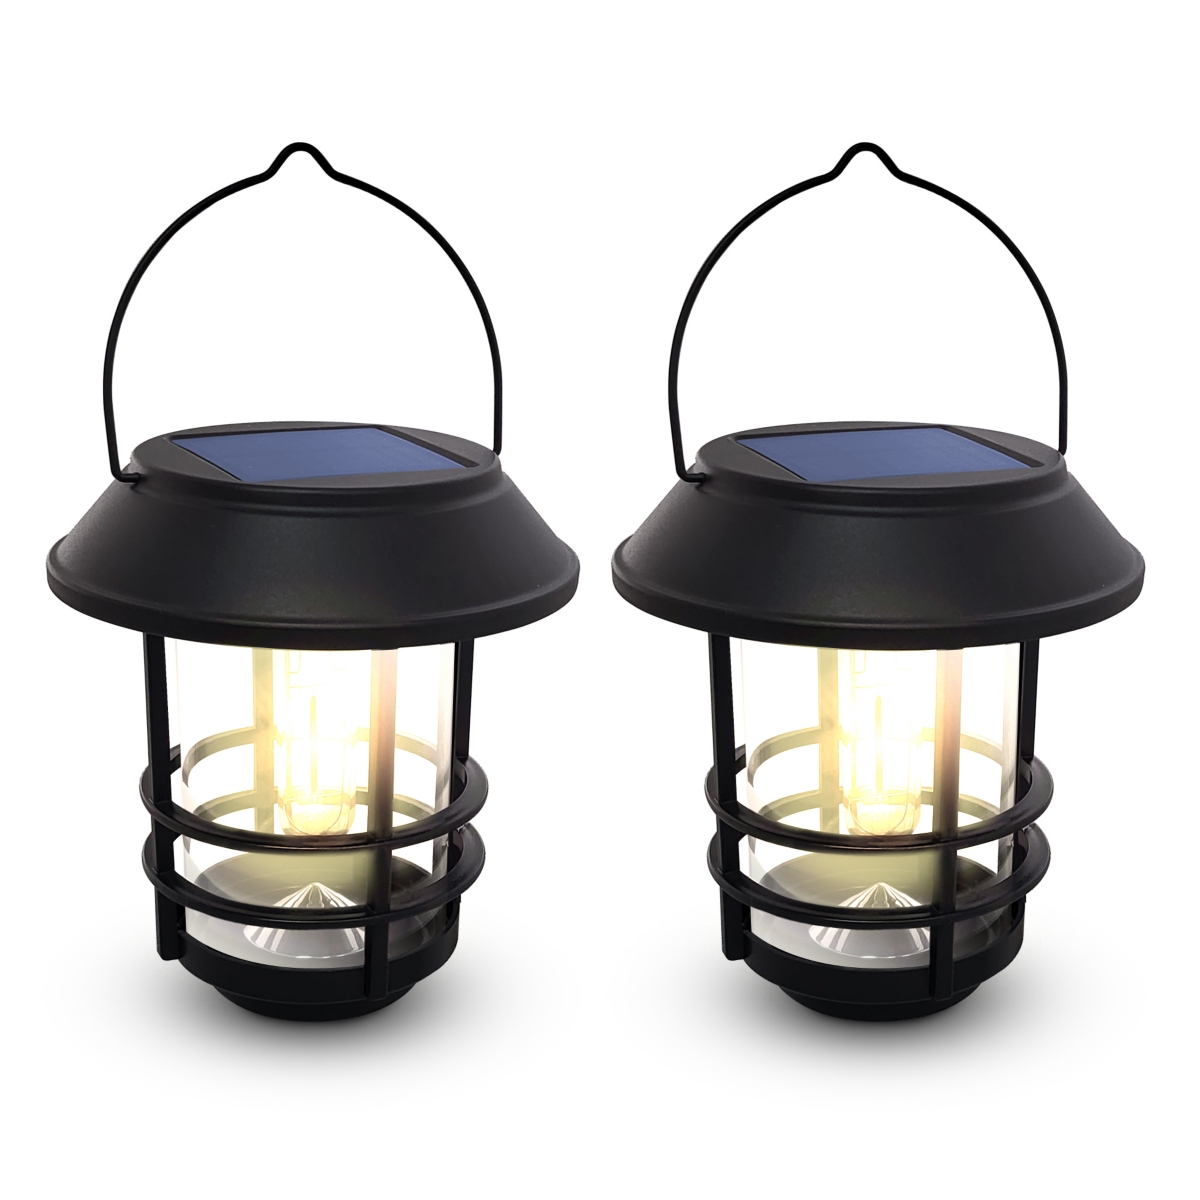 Solar Wall Lanterns - Outdoor Mounted Wall Lanterns for Your Yard, Patio, or Walkway (2 Pack, Black) - Black